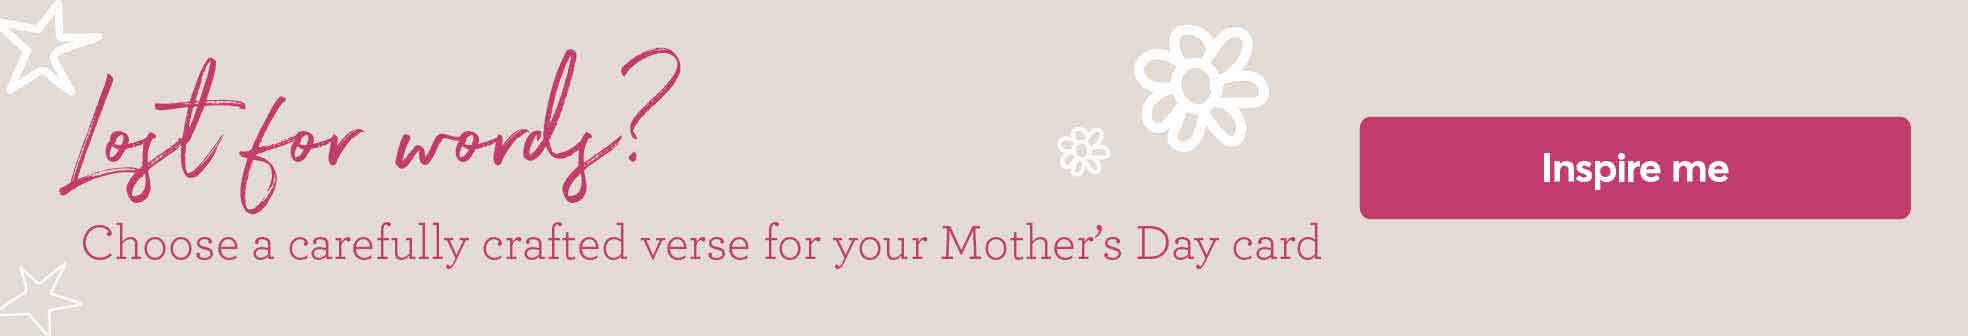 Mother's Day verse inspiration